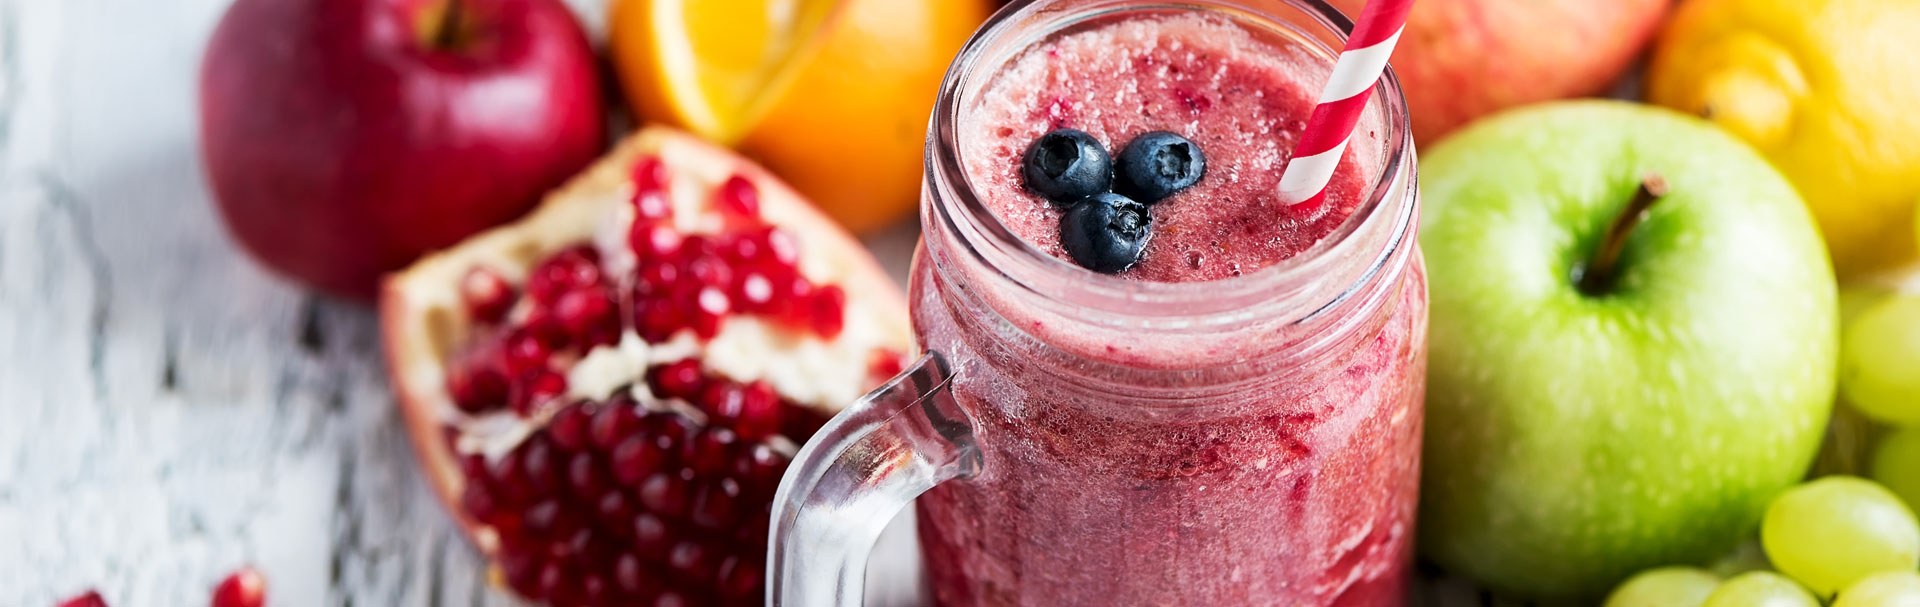 smoothie jar with blueberry and fruit